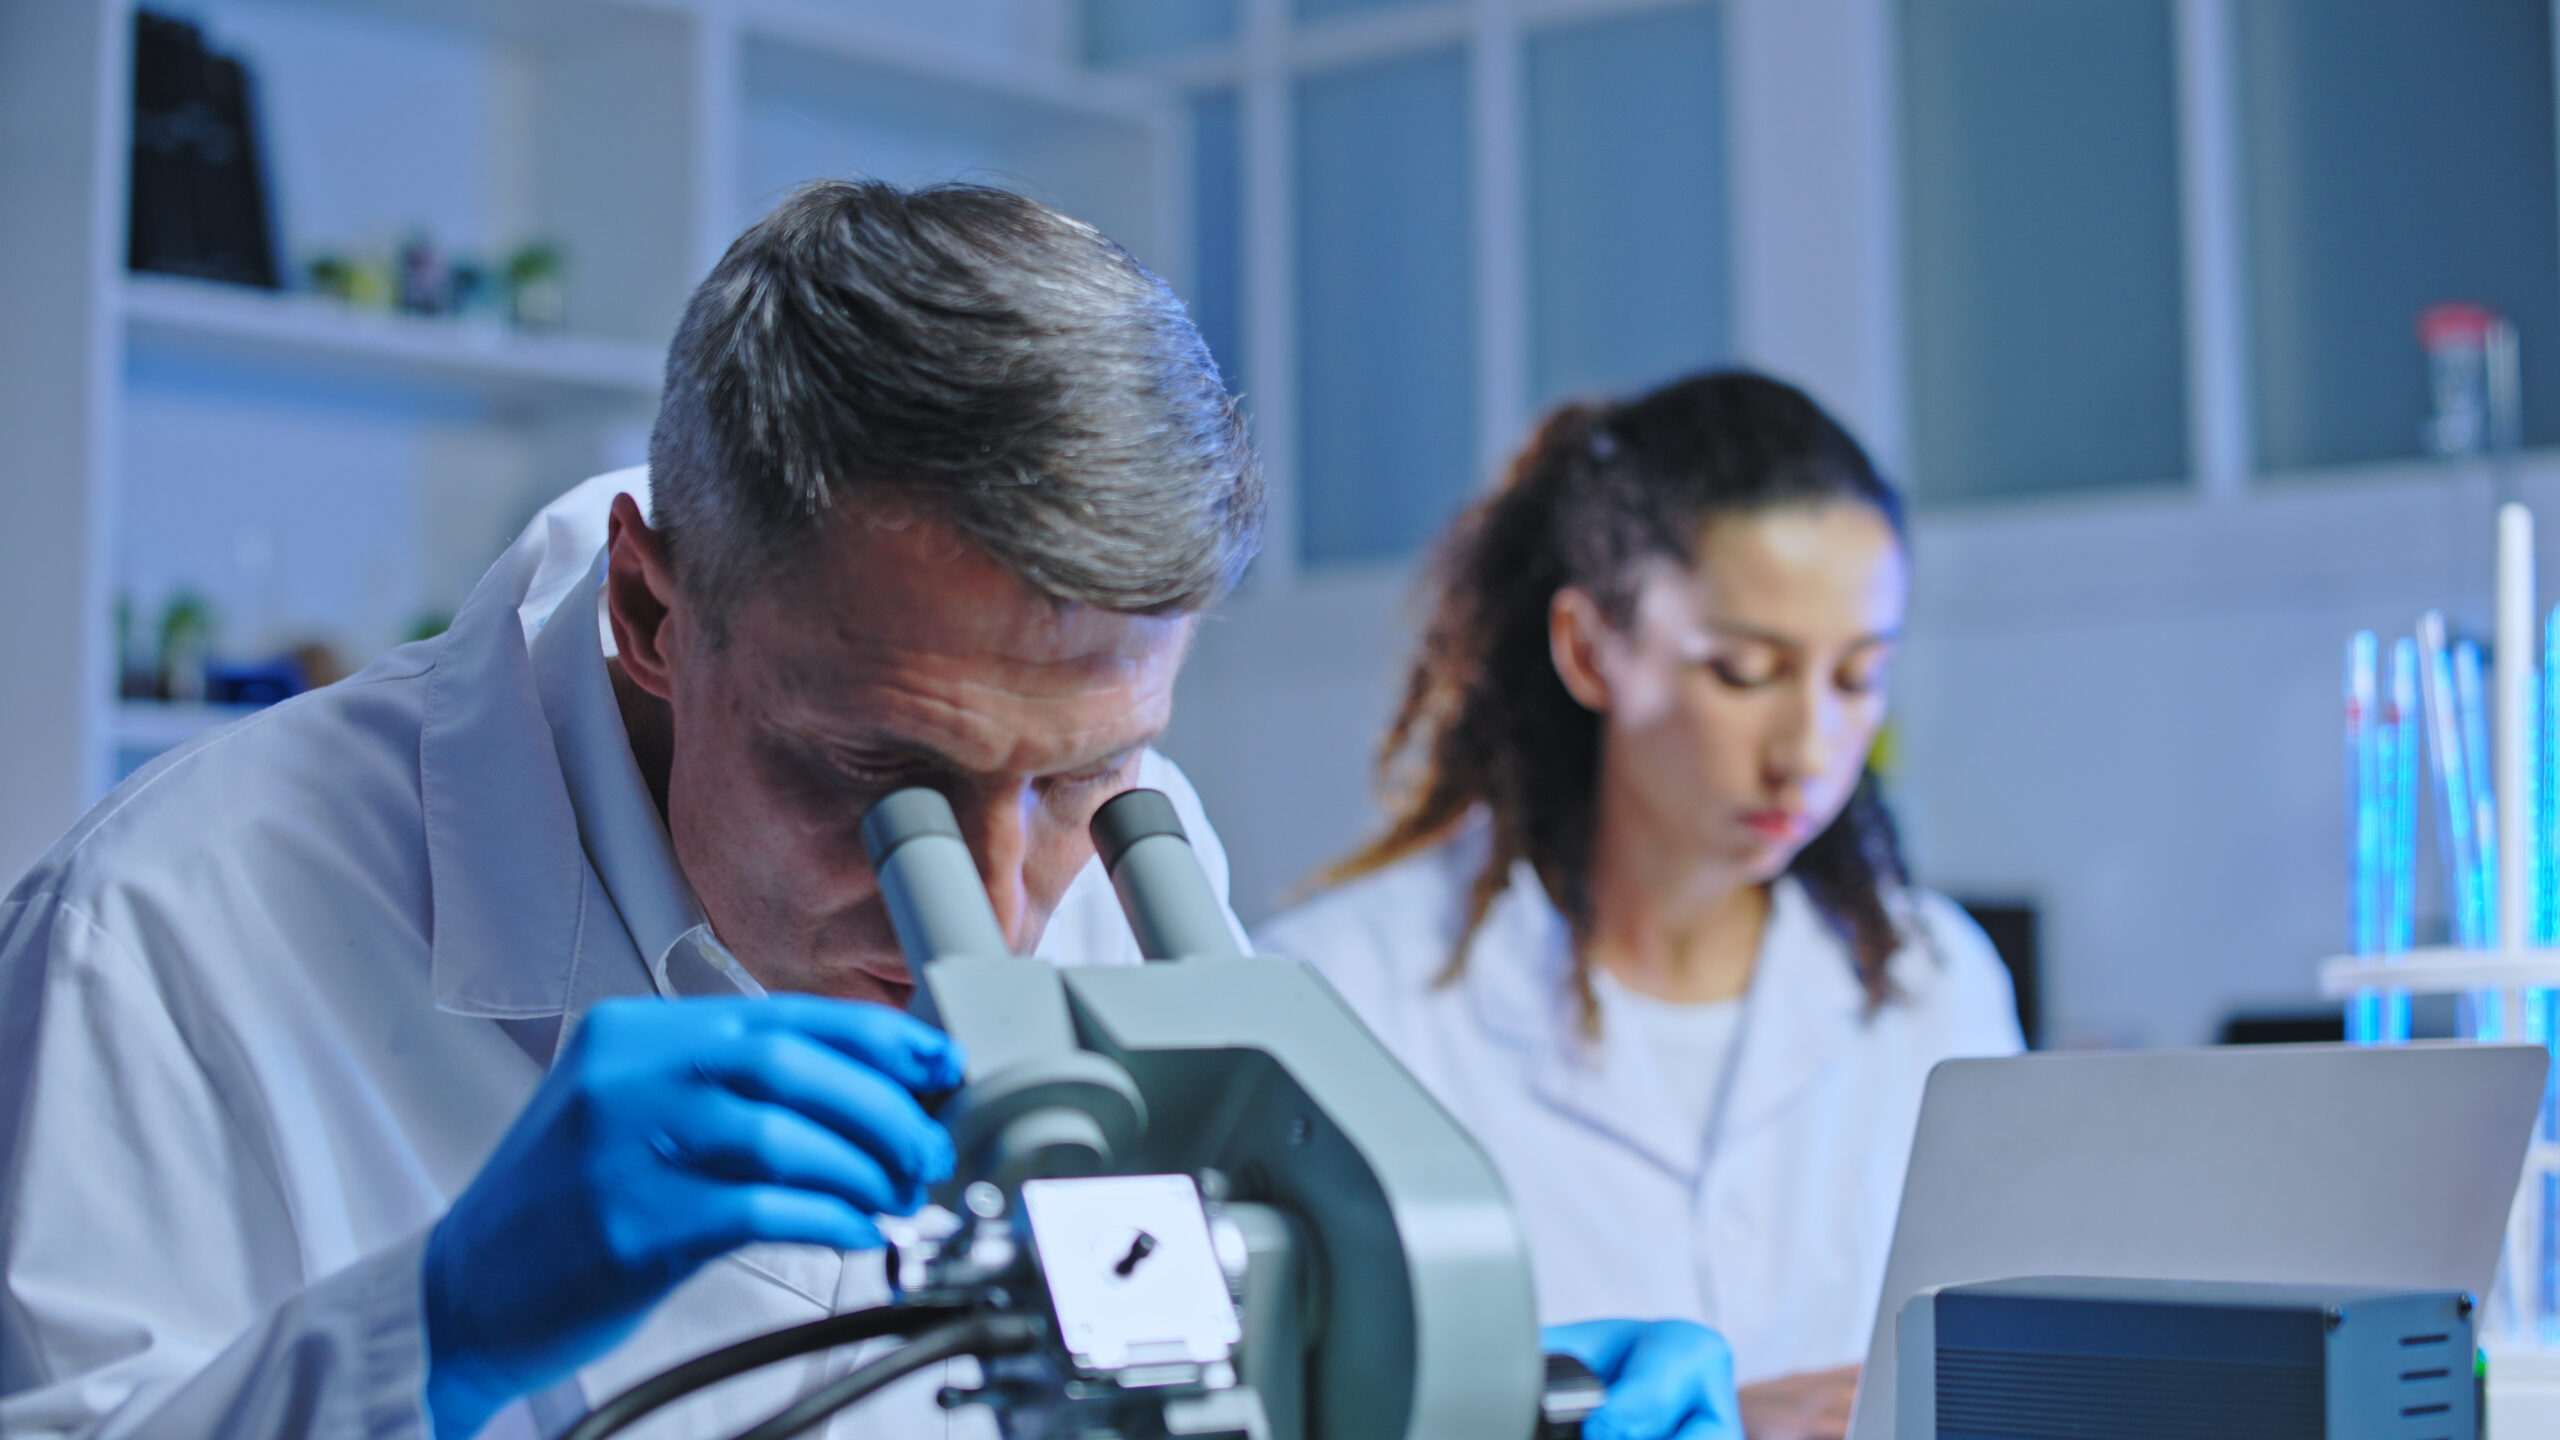 Oncology doctor examining tissue sample under microscope, clinical diagnostic lab